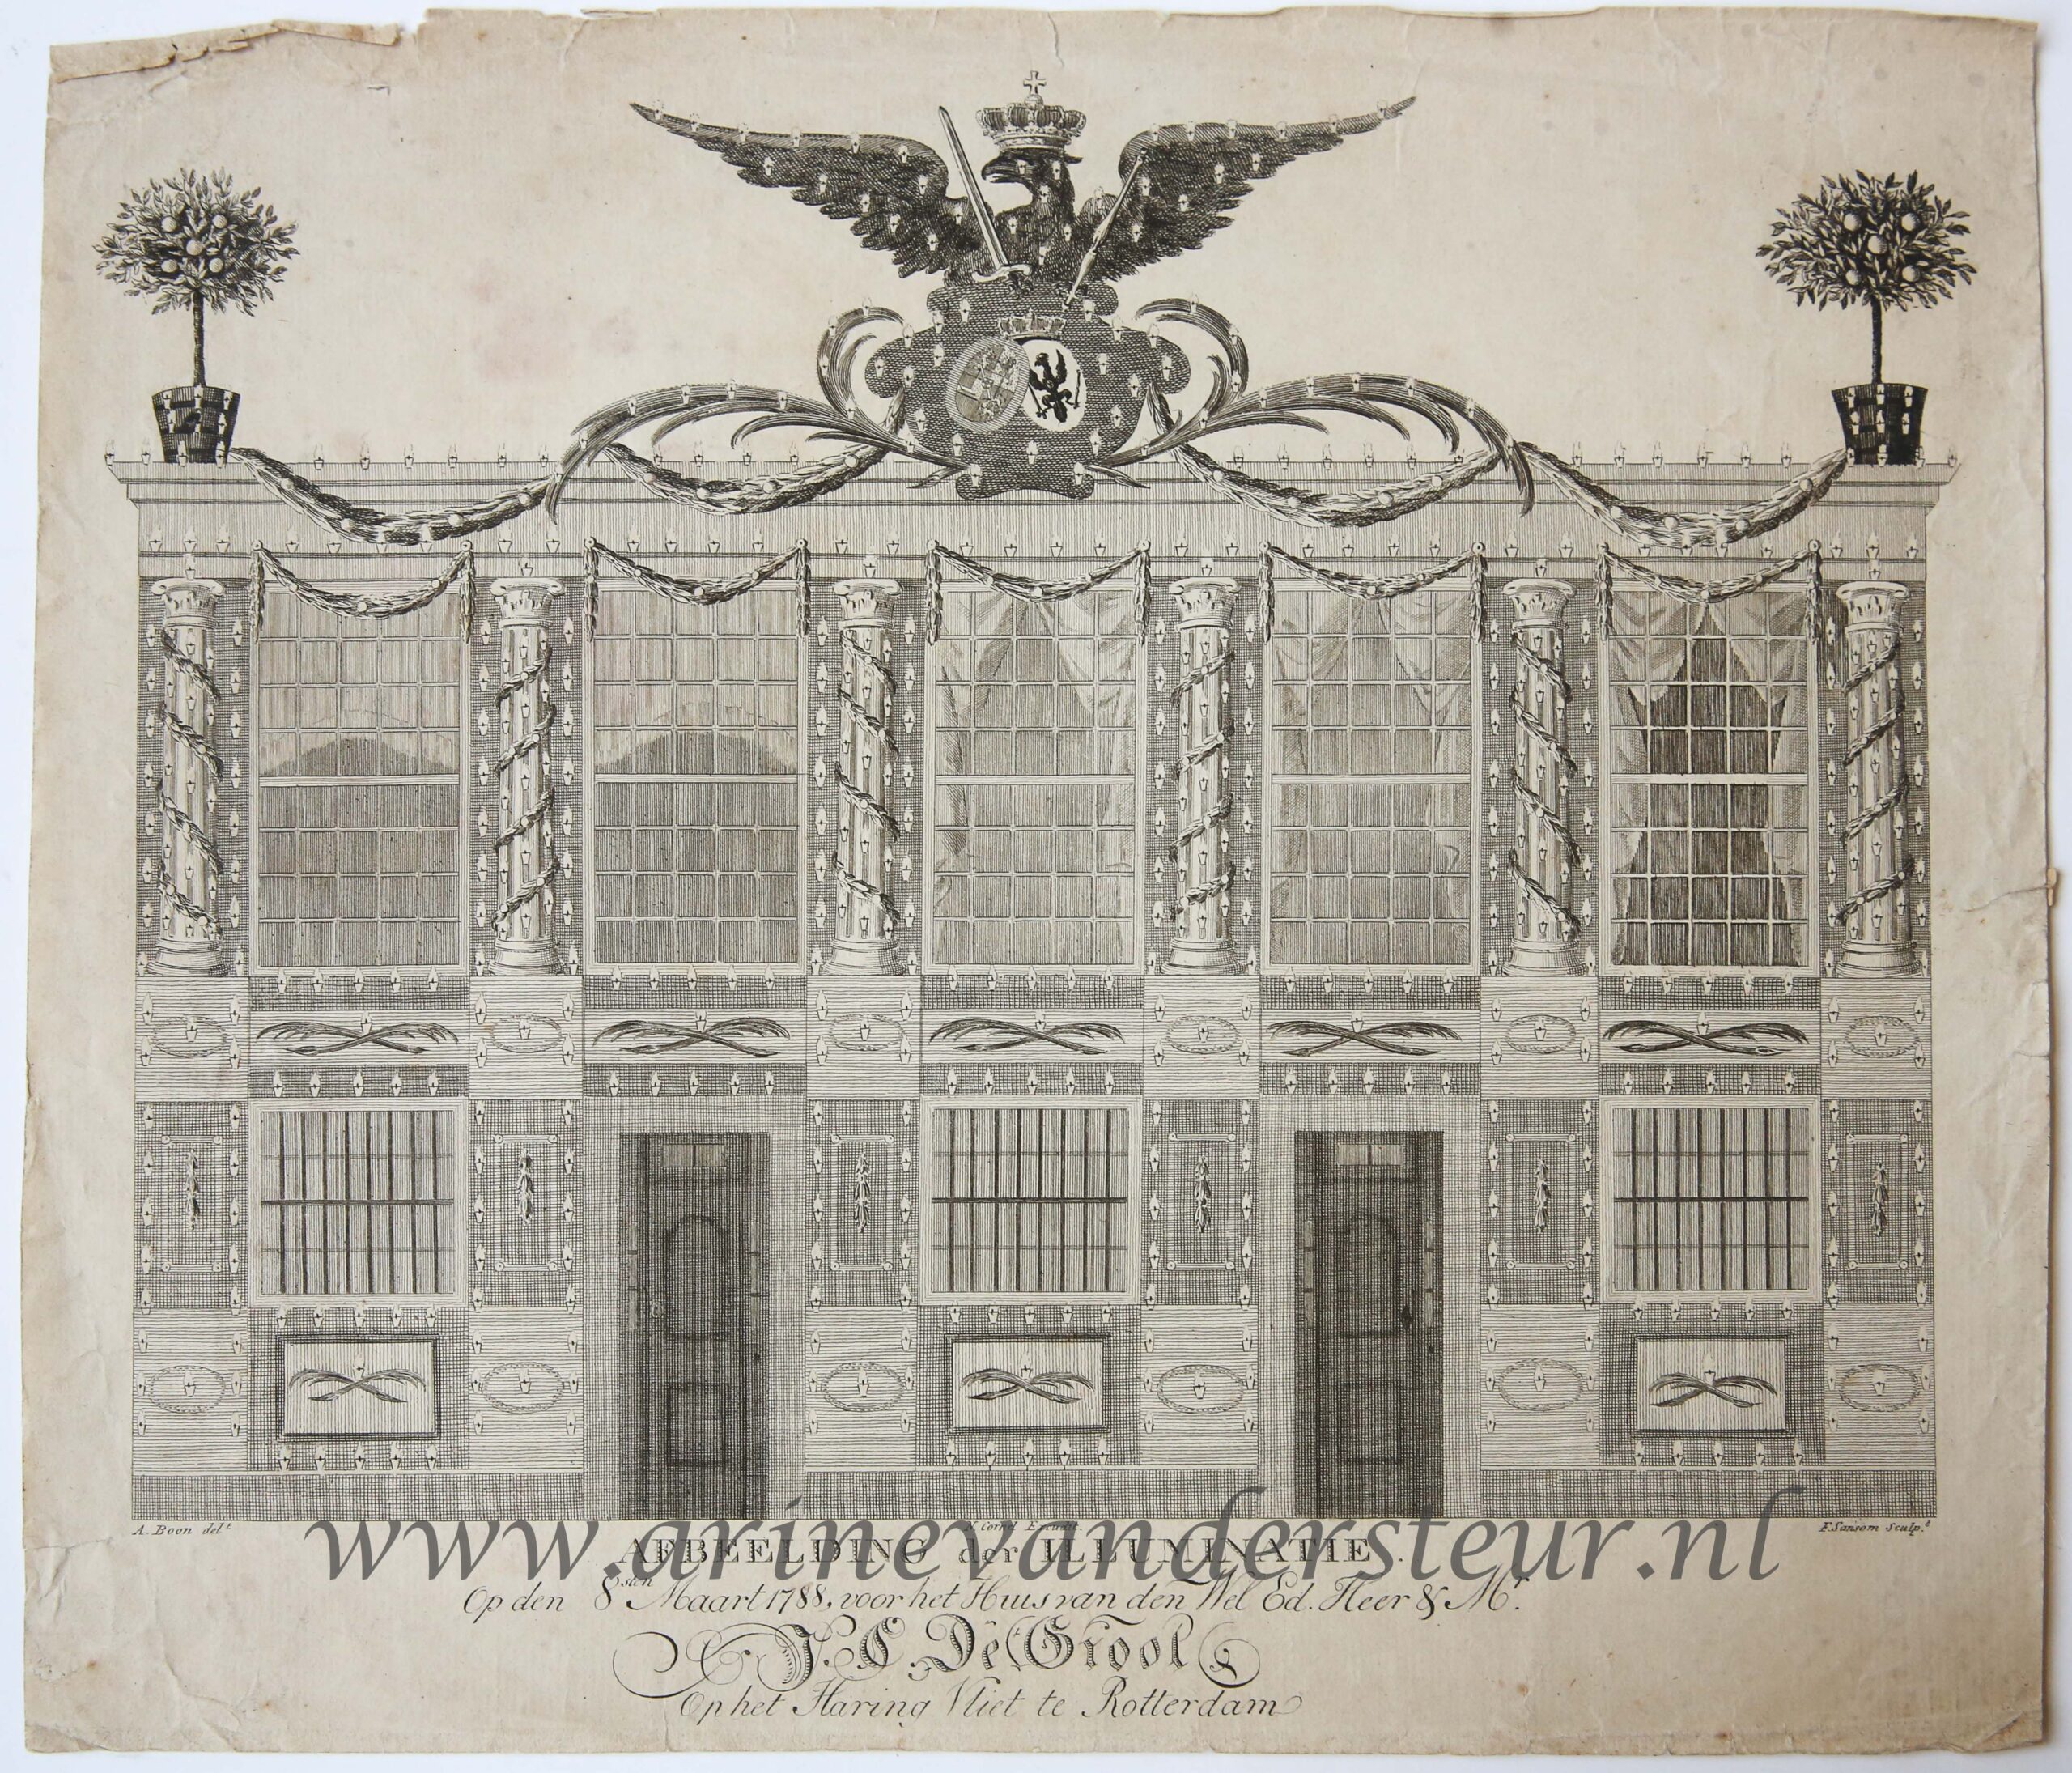 [Original print, etching and engraving, Rotterdam] Illumination of the house of J.C. de Groot in Rotterdam, published 1788.